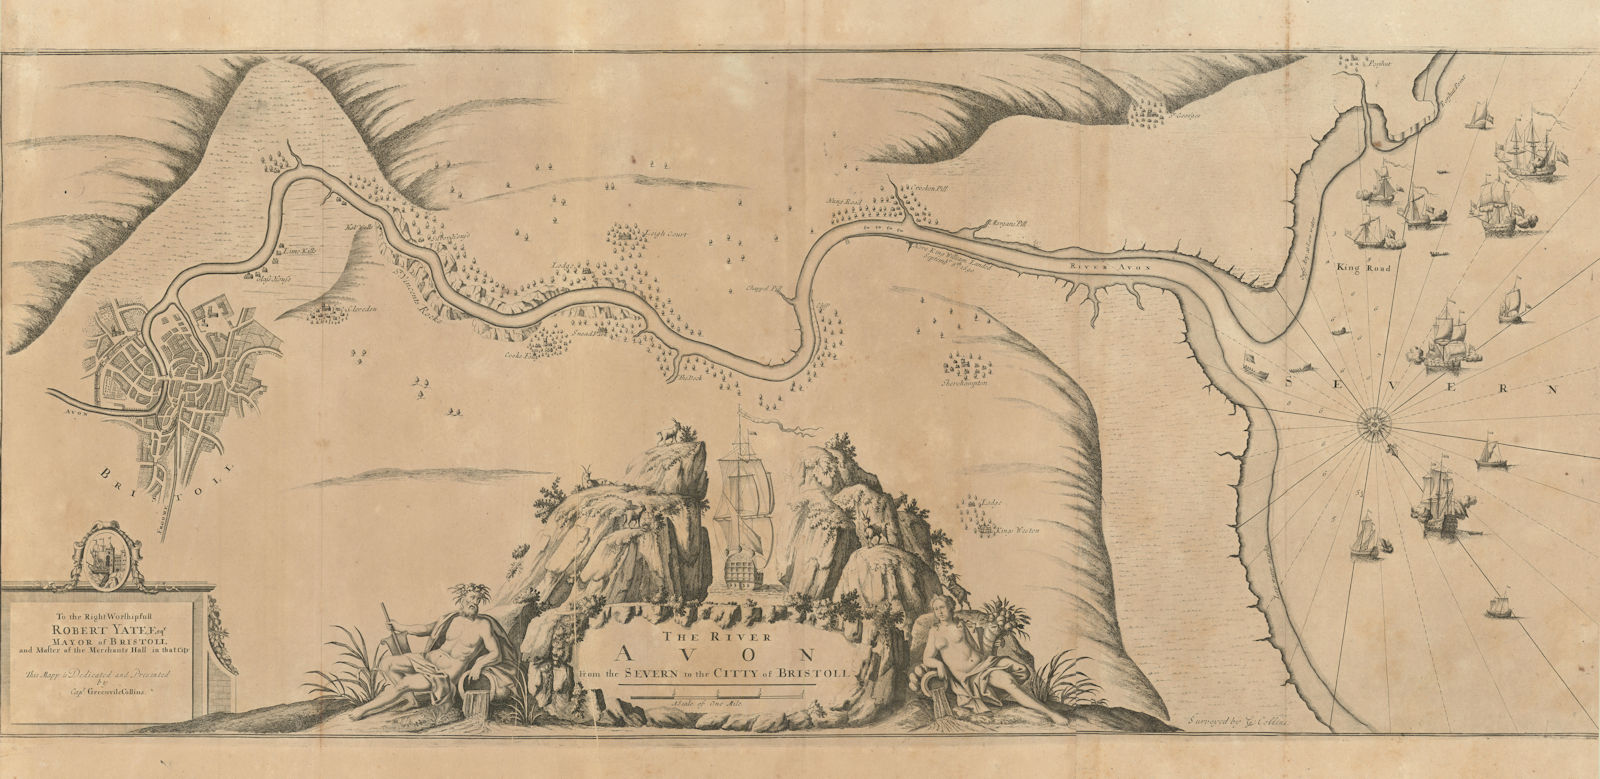 Associate Product The River Avon from the Severn to the Citty of Bristoll. COLLINS 1693 old map